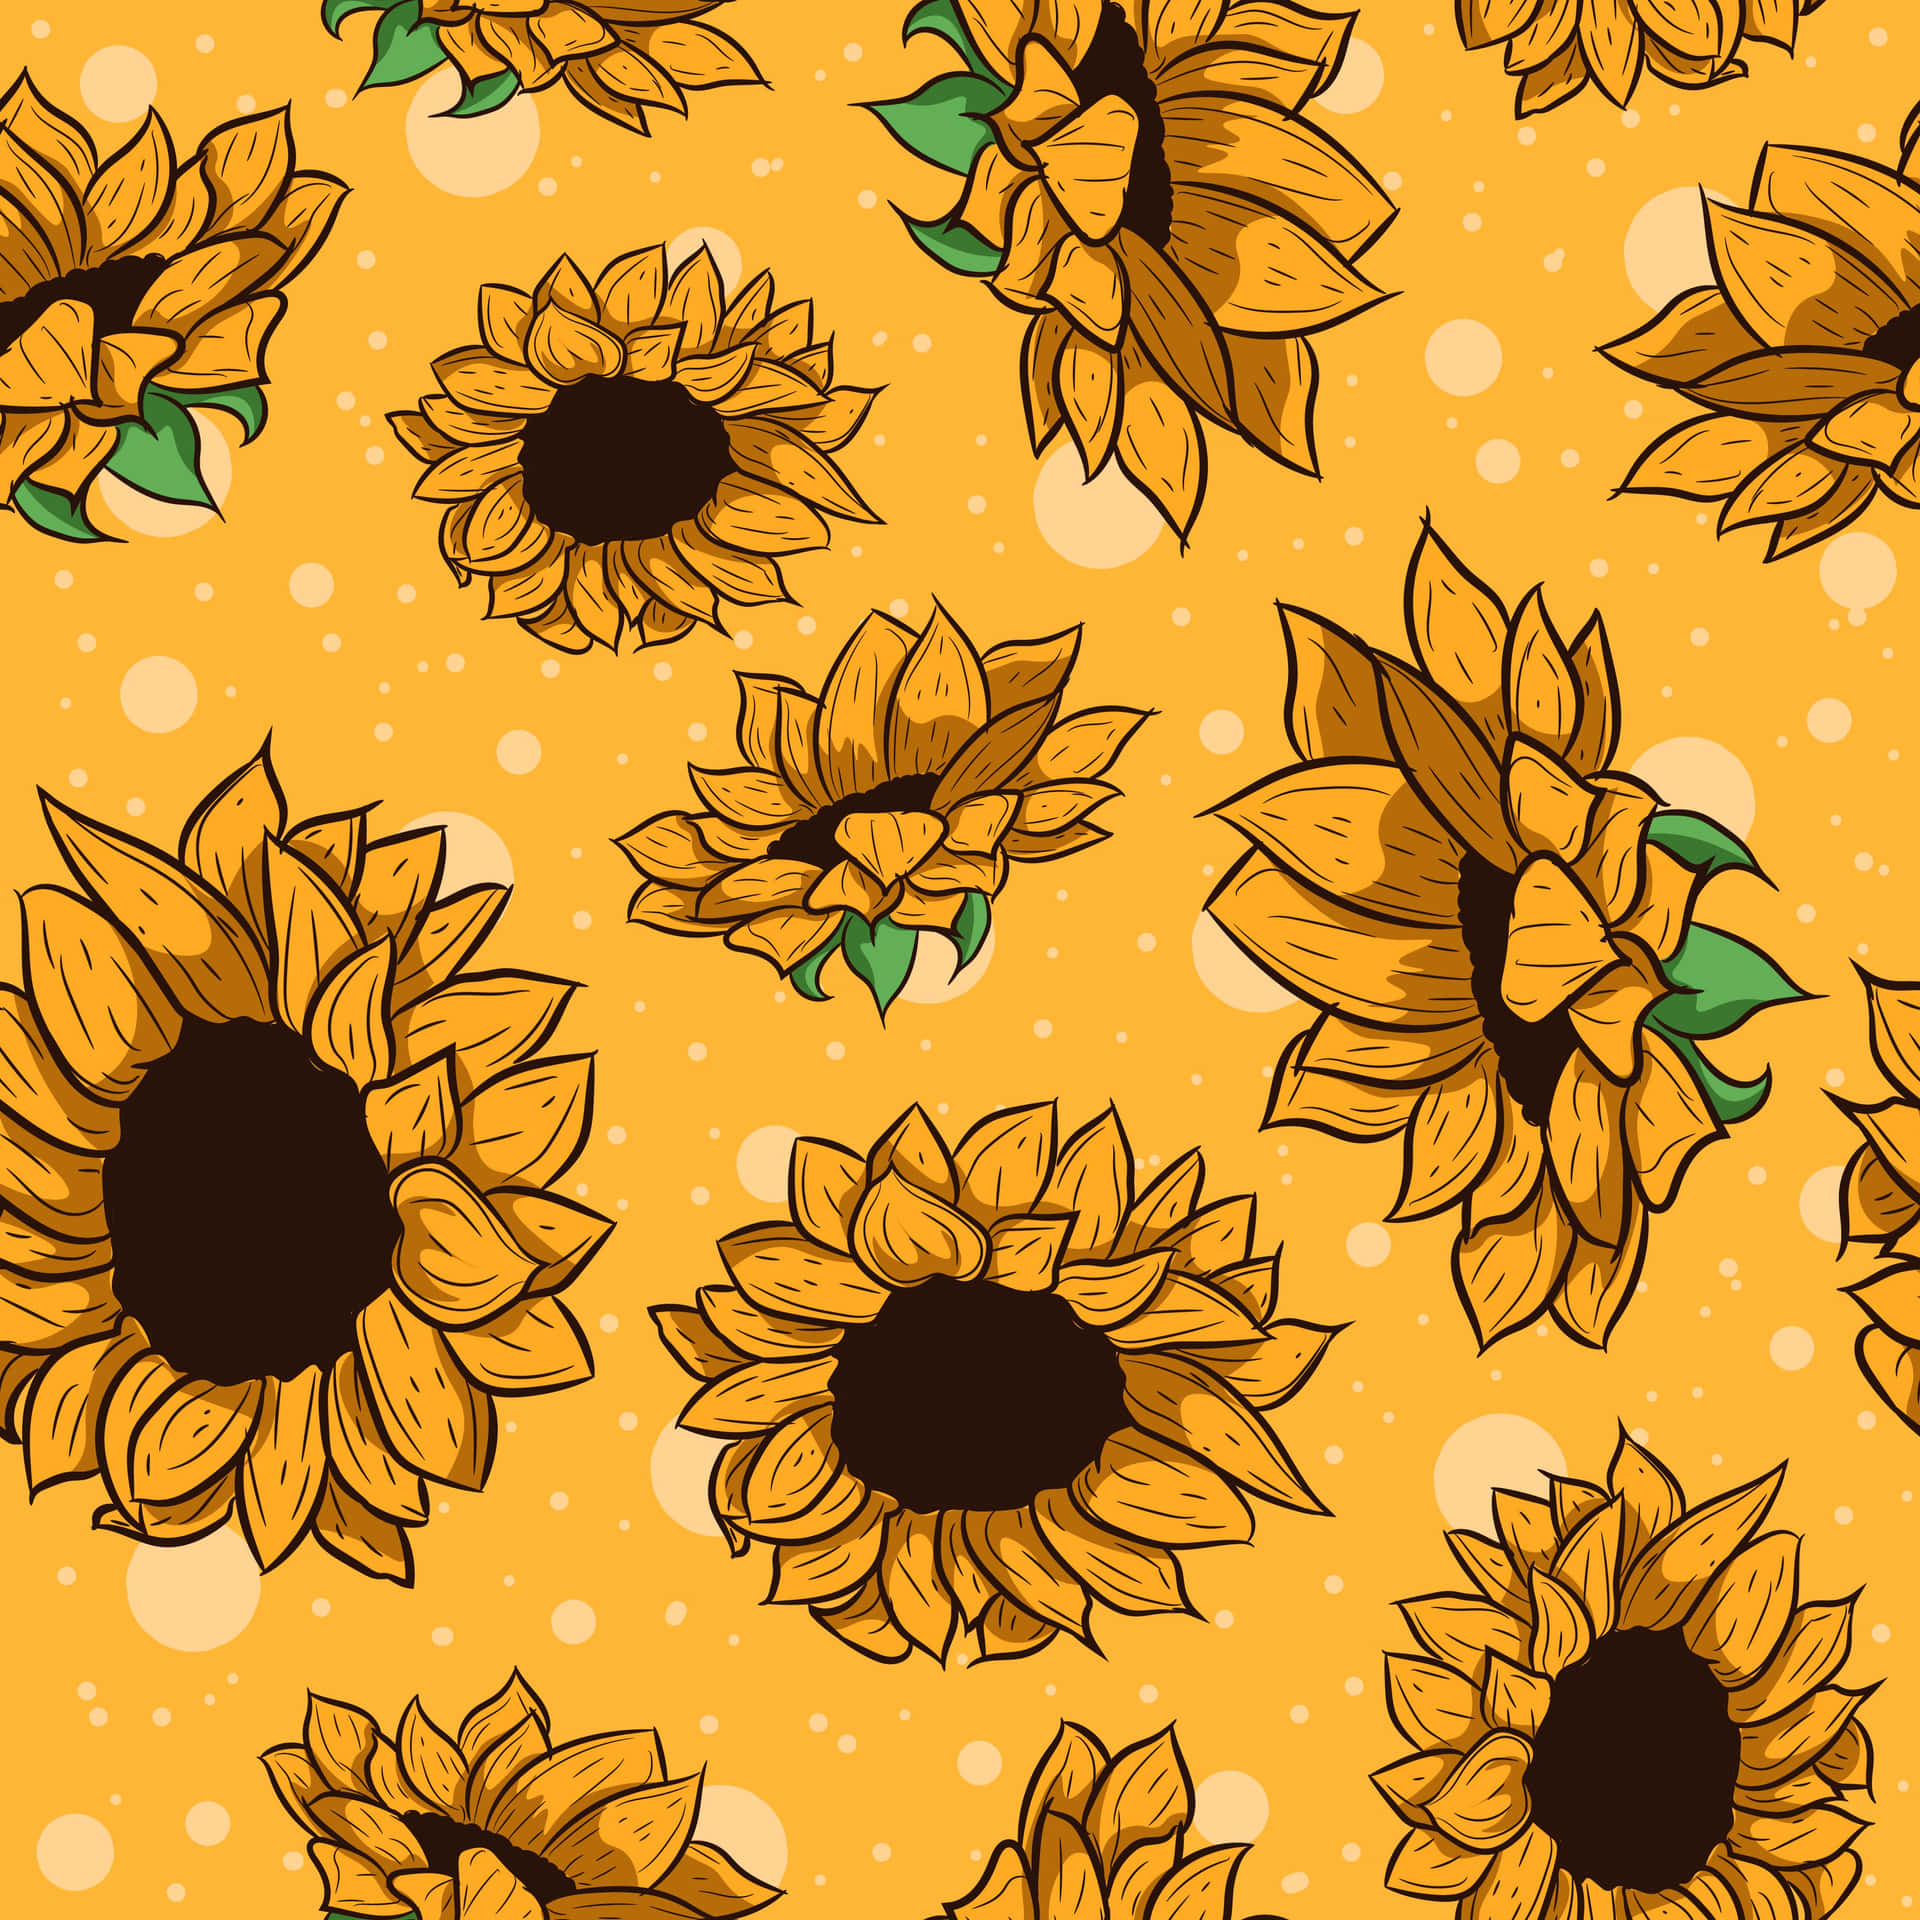 sunflowers on a yellow background